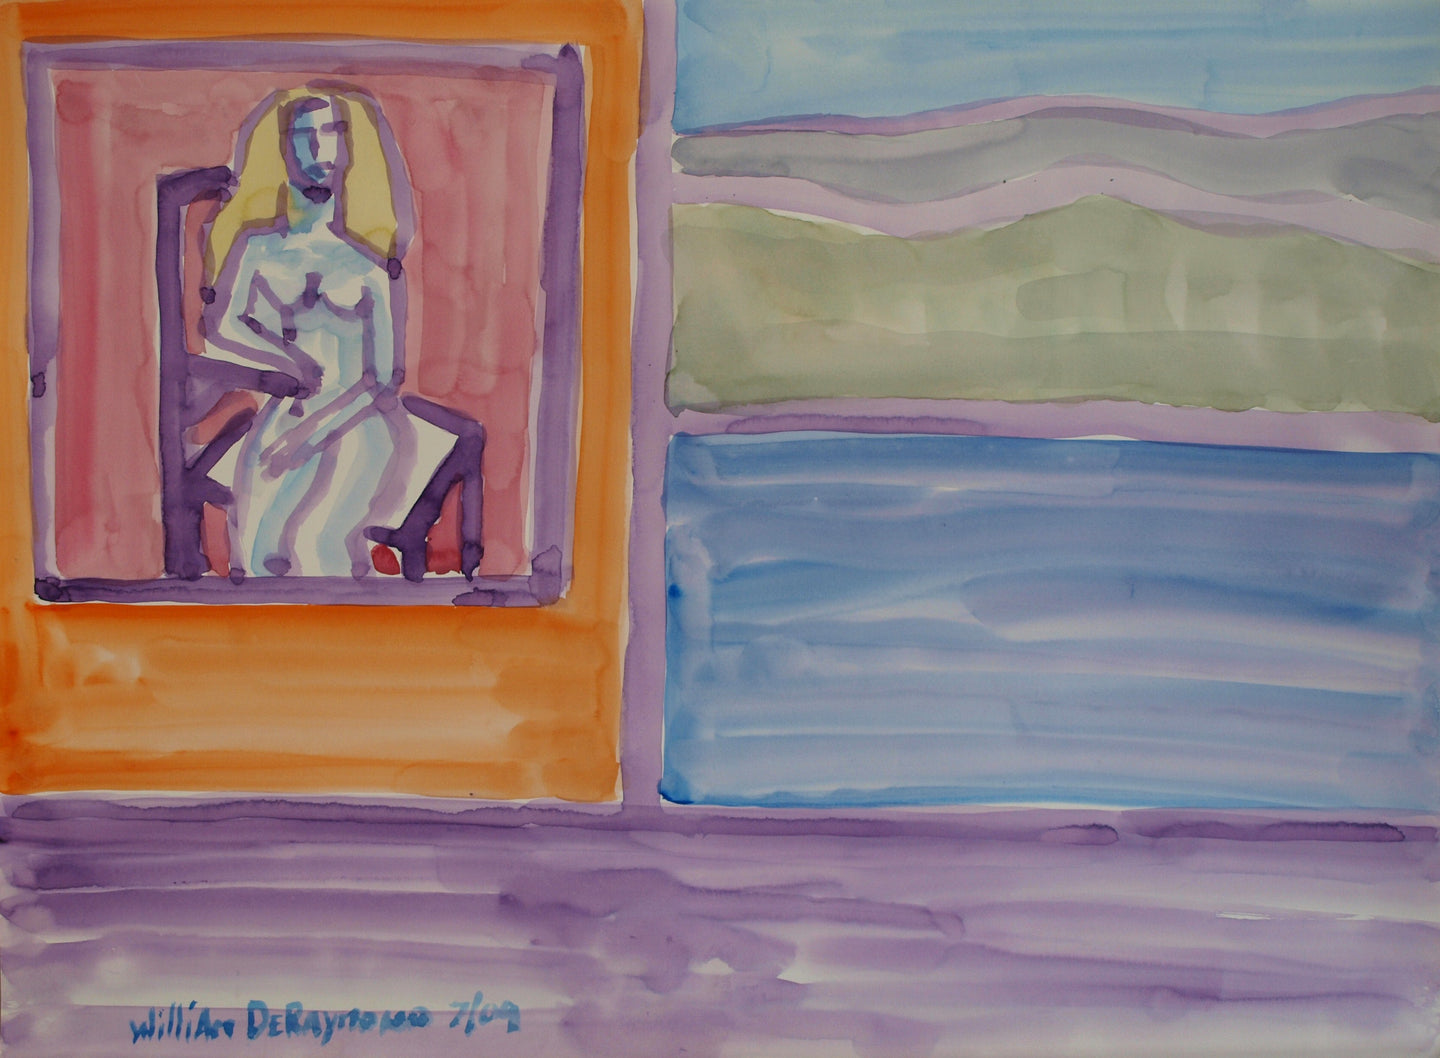 imaginary #watercolor #painting composition with figure #art, 22